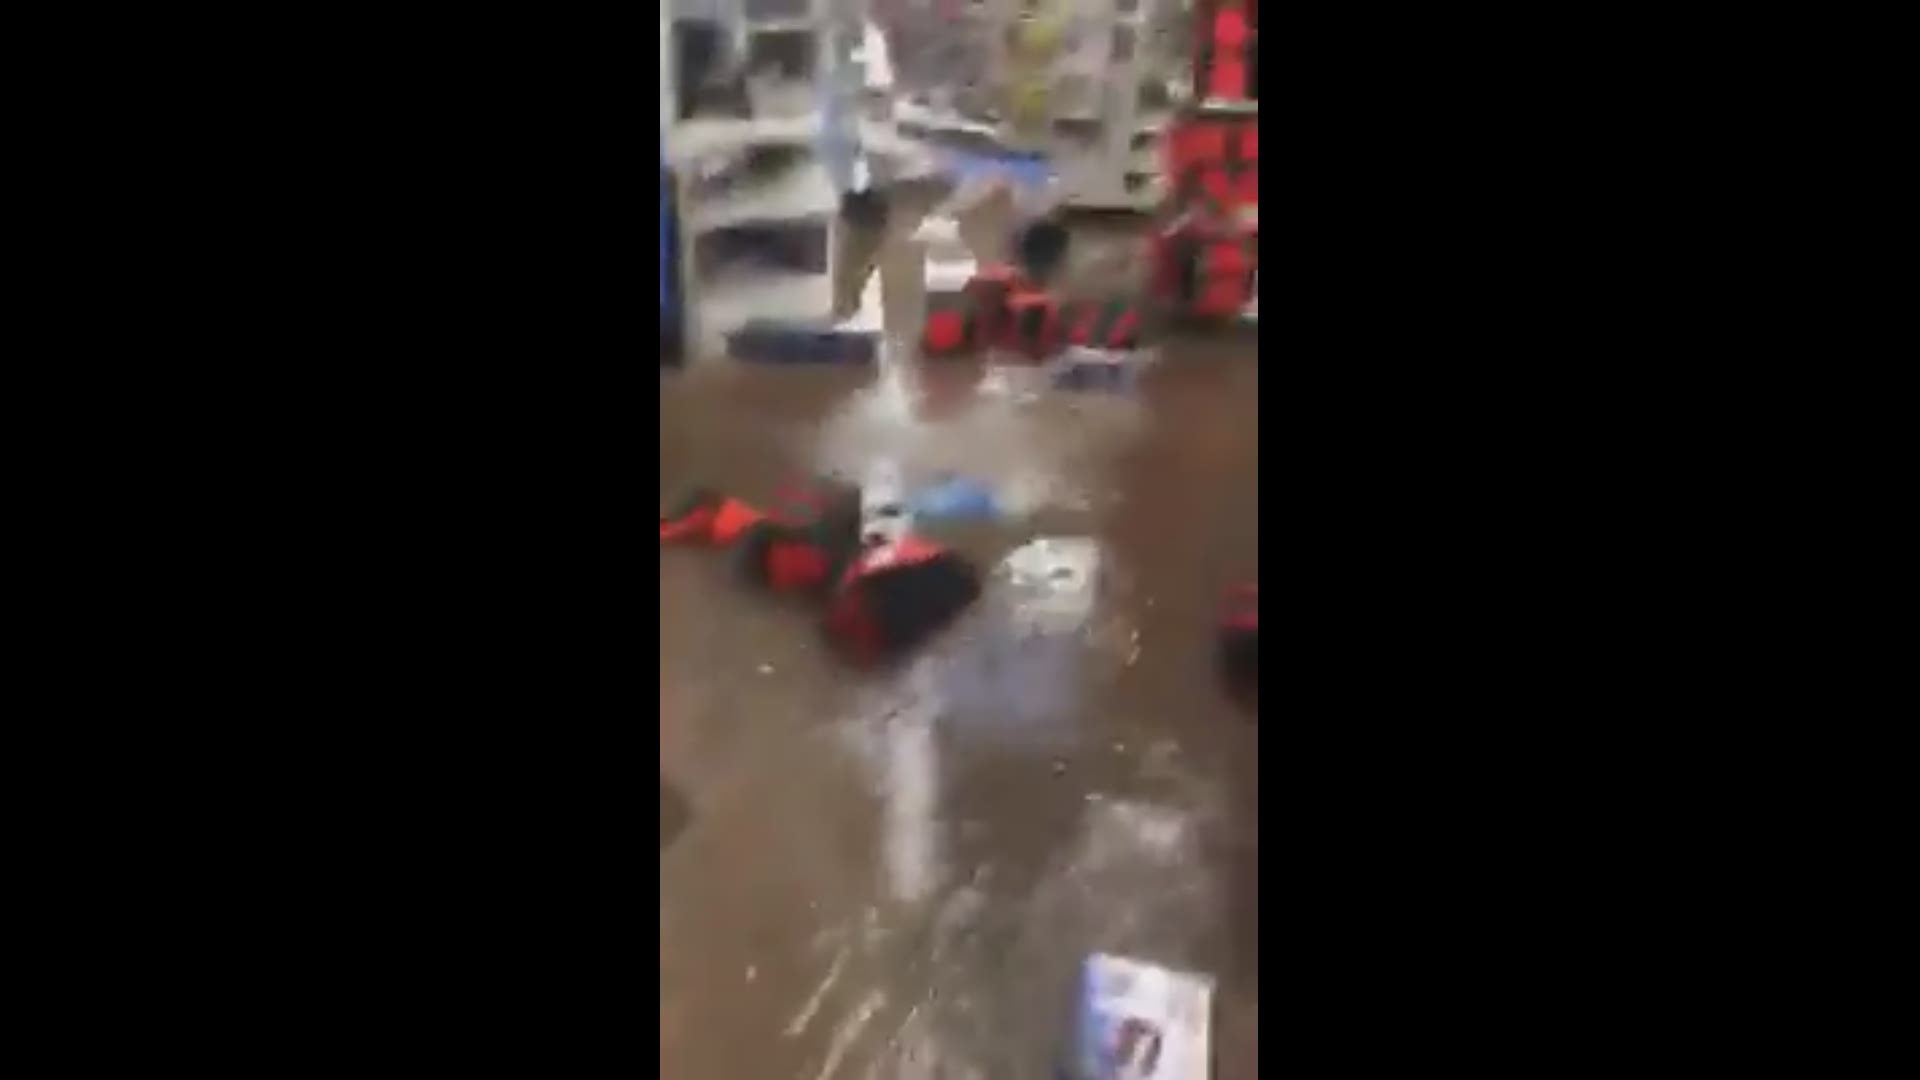 The roof collapsed flooding the Walmart on Booth Road in Warner Robins during severe thunderstorms Saturday. (Submitted by Ashley Wilcox)